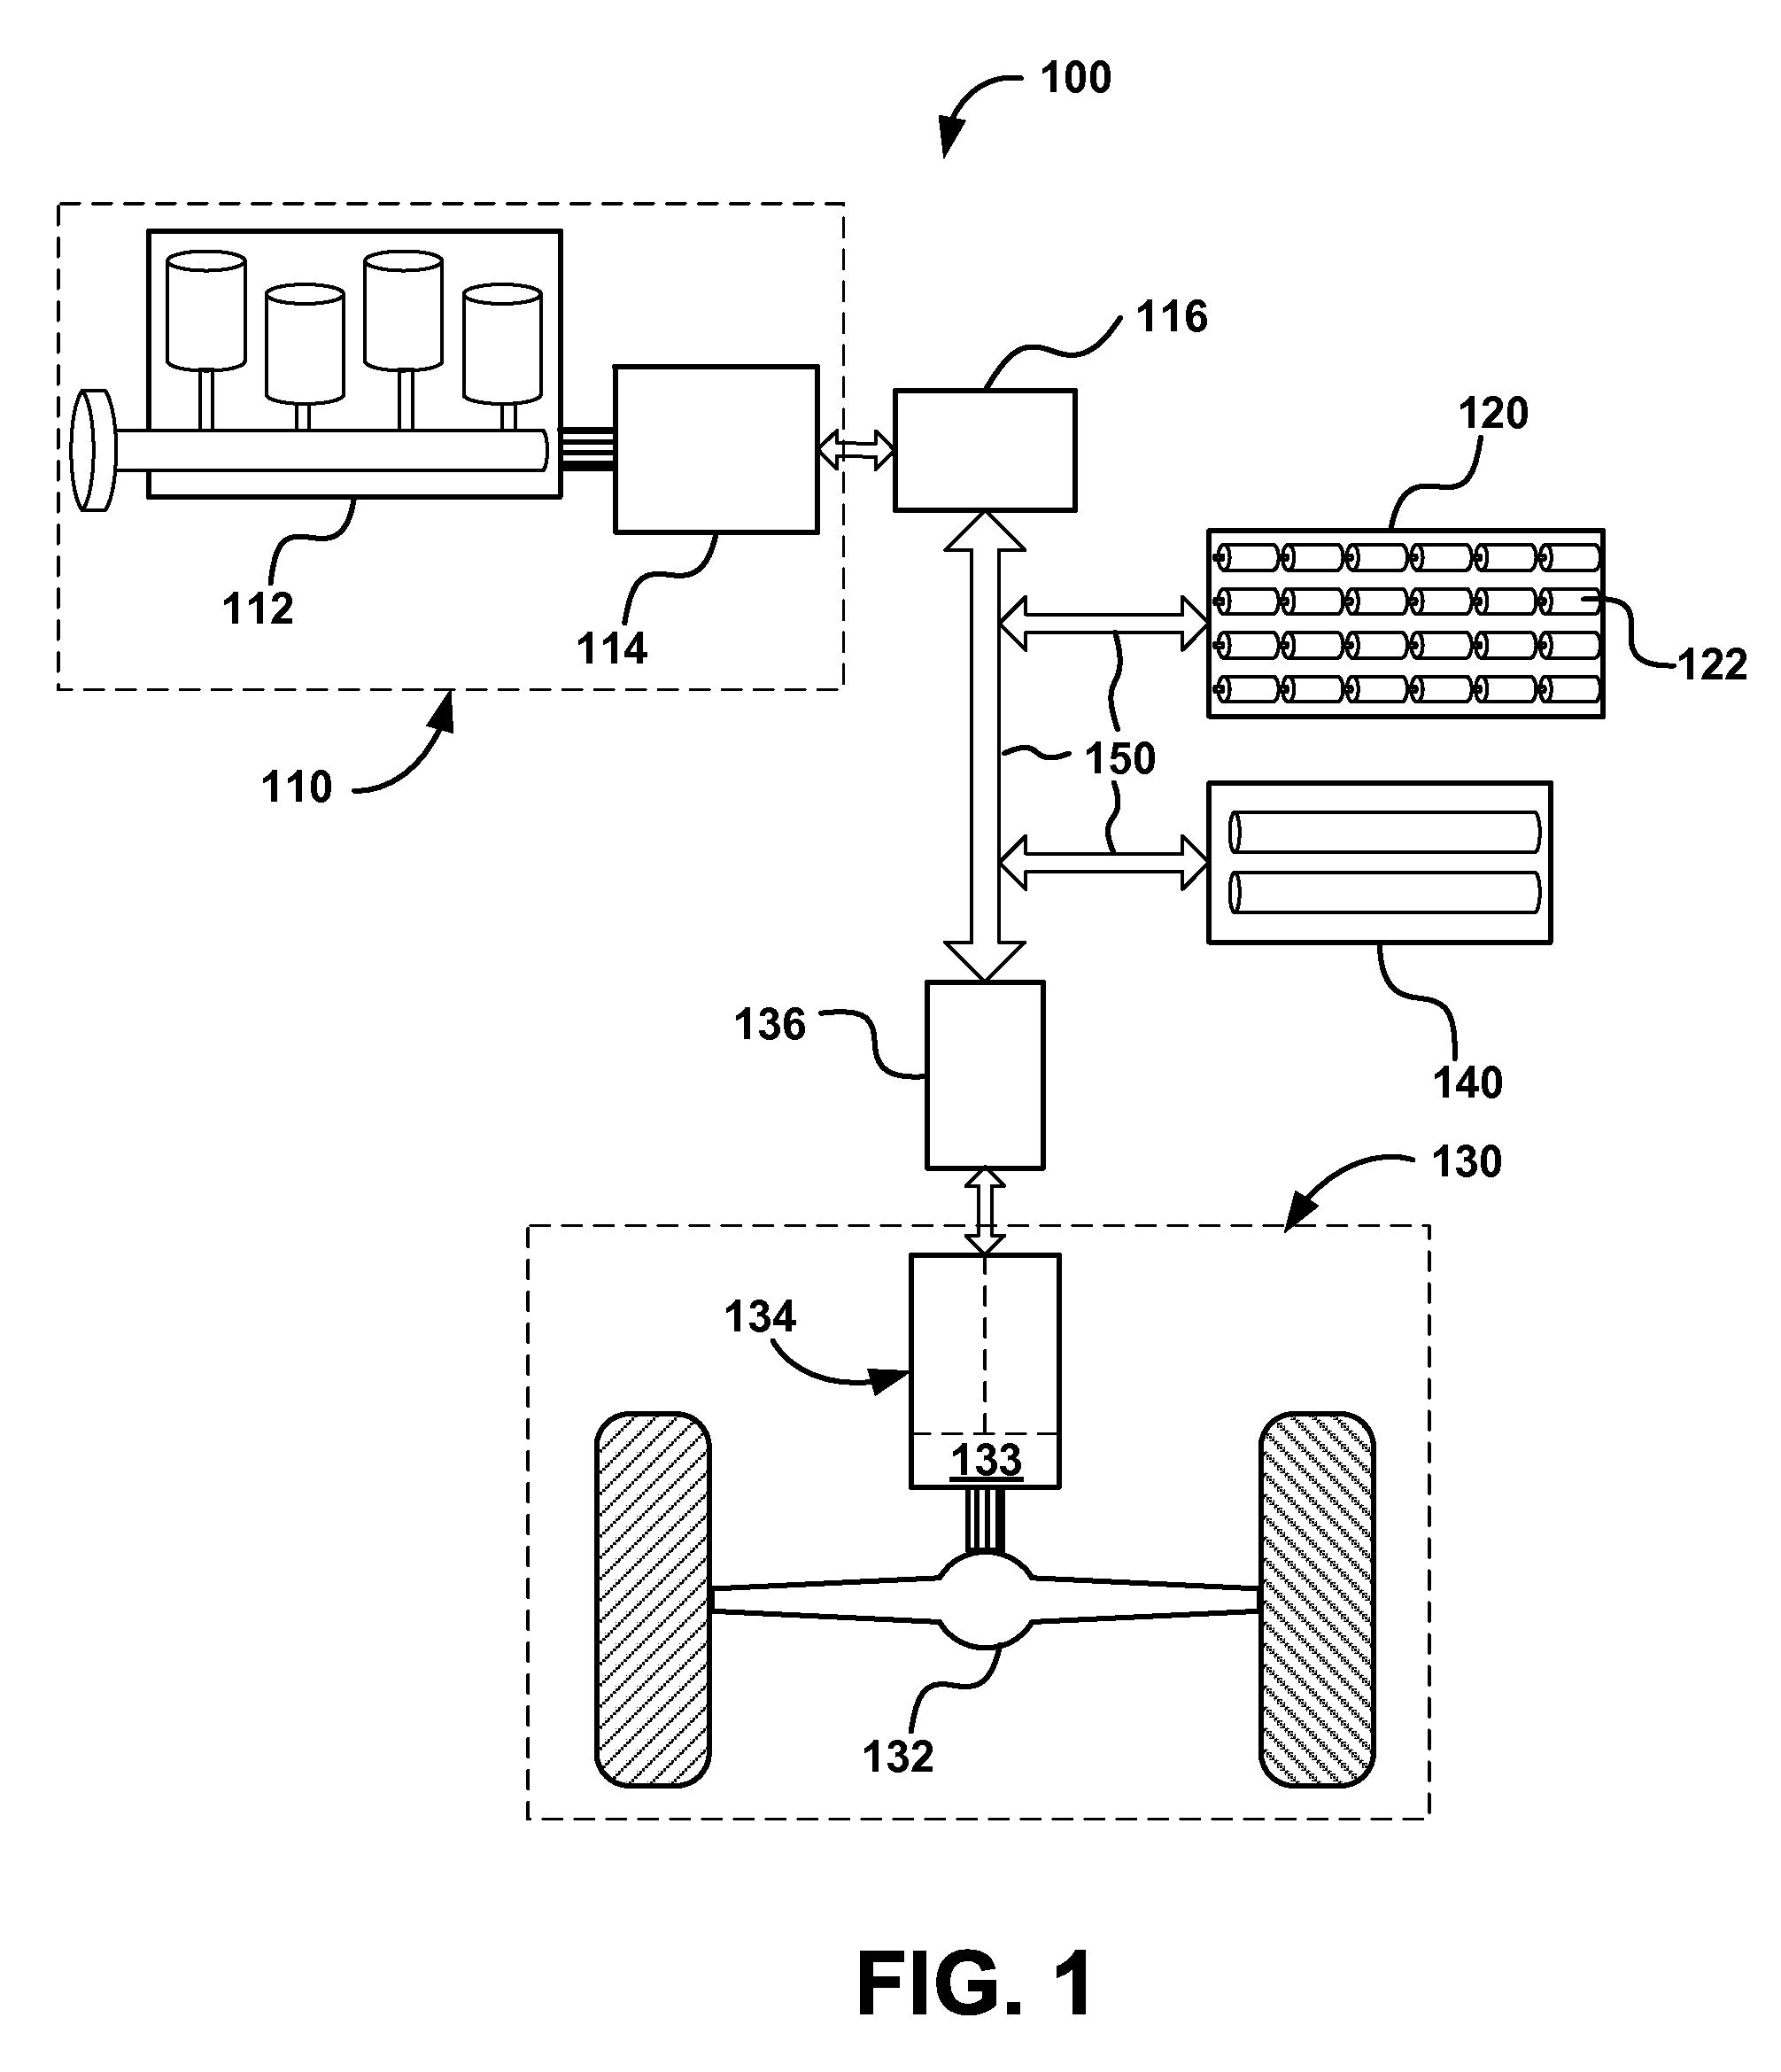 Hybrid electric vehicle system and method for initiating and operating a hybrid vehicle in a limited operation mode